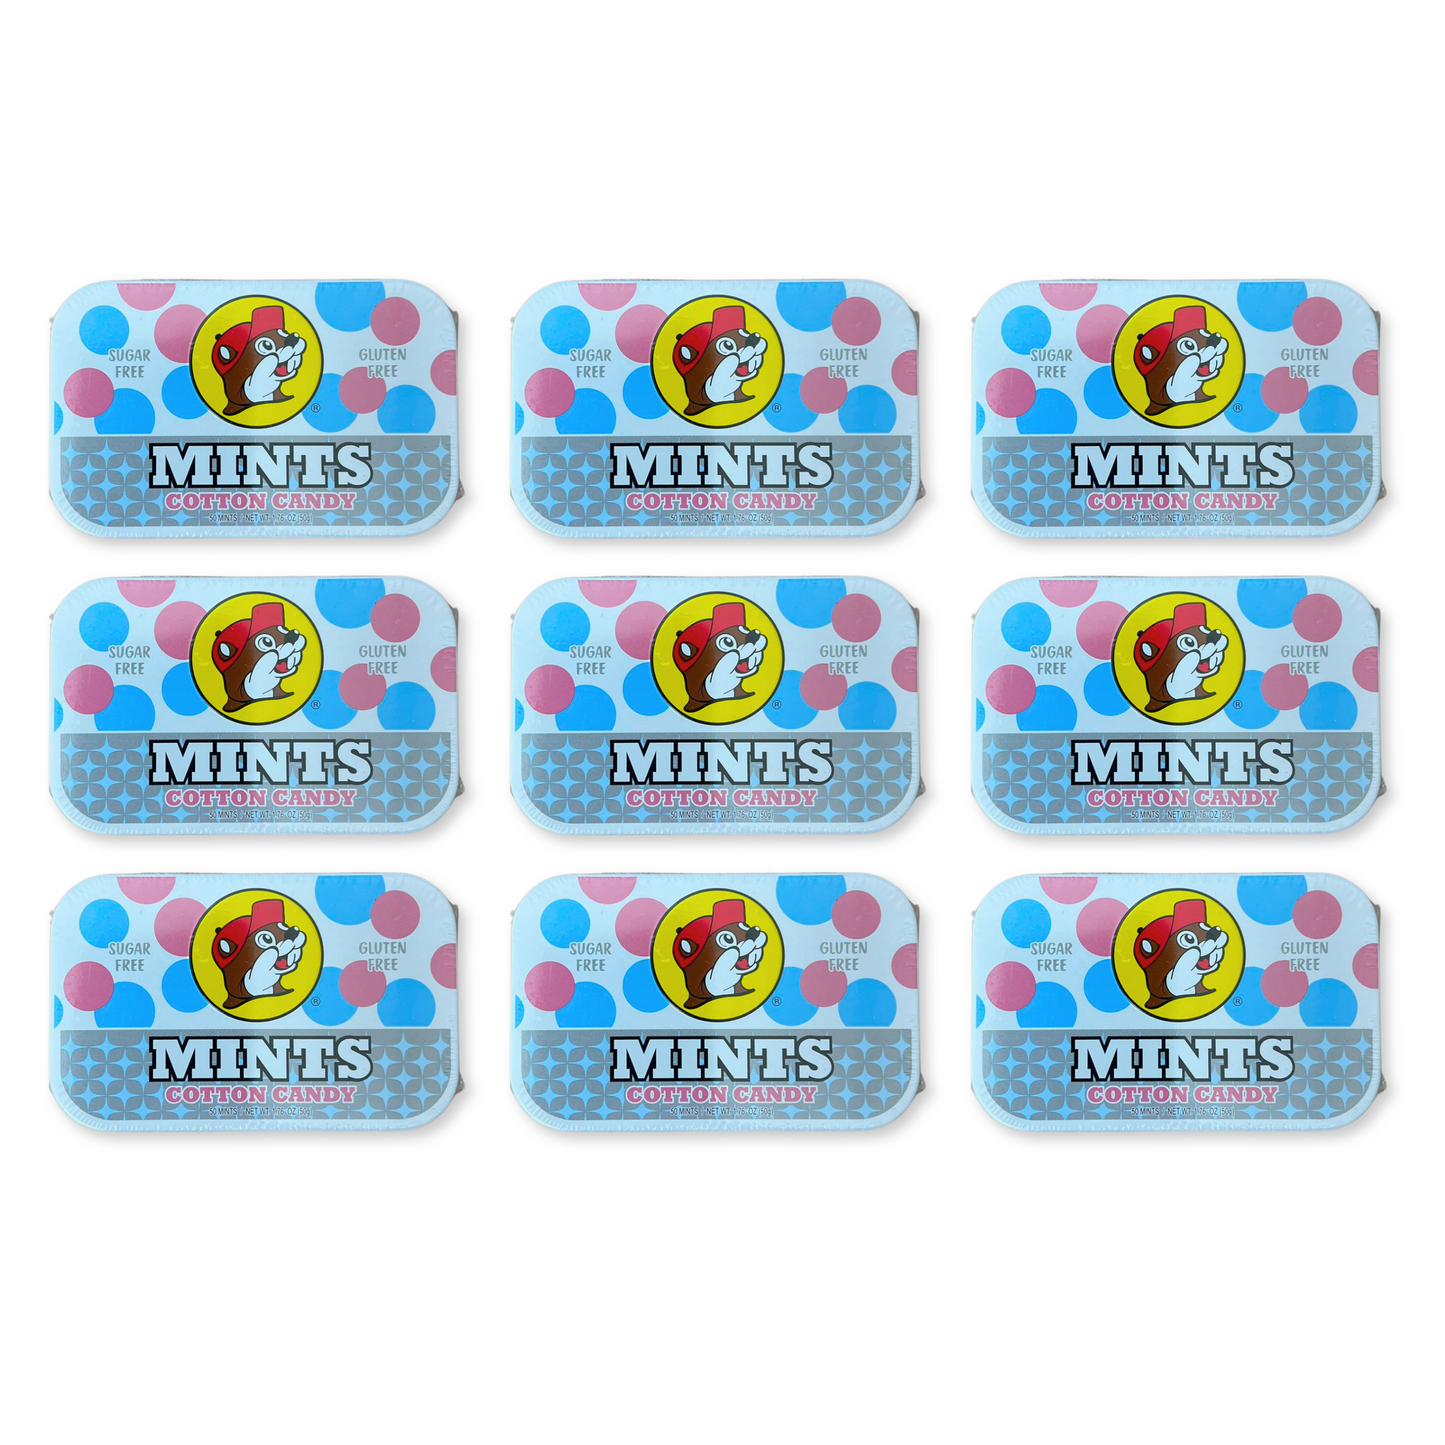 Buc-ee's Flavored Mints and Sours buc ees buc ee's bucees buccees buc-ees